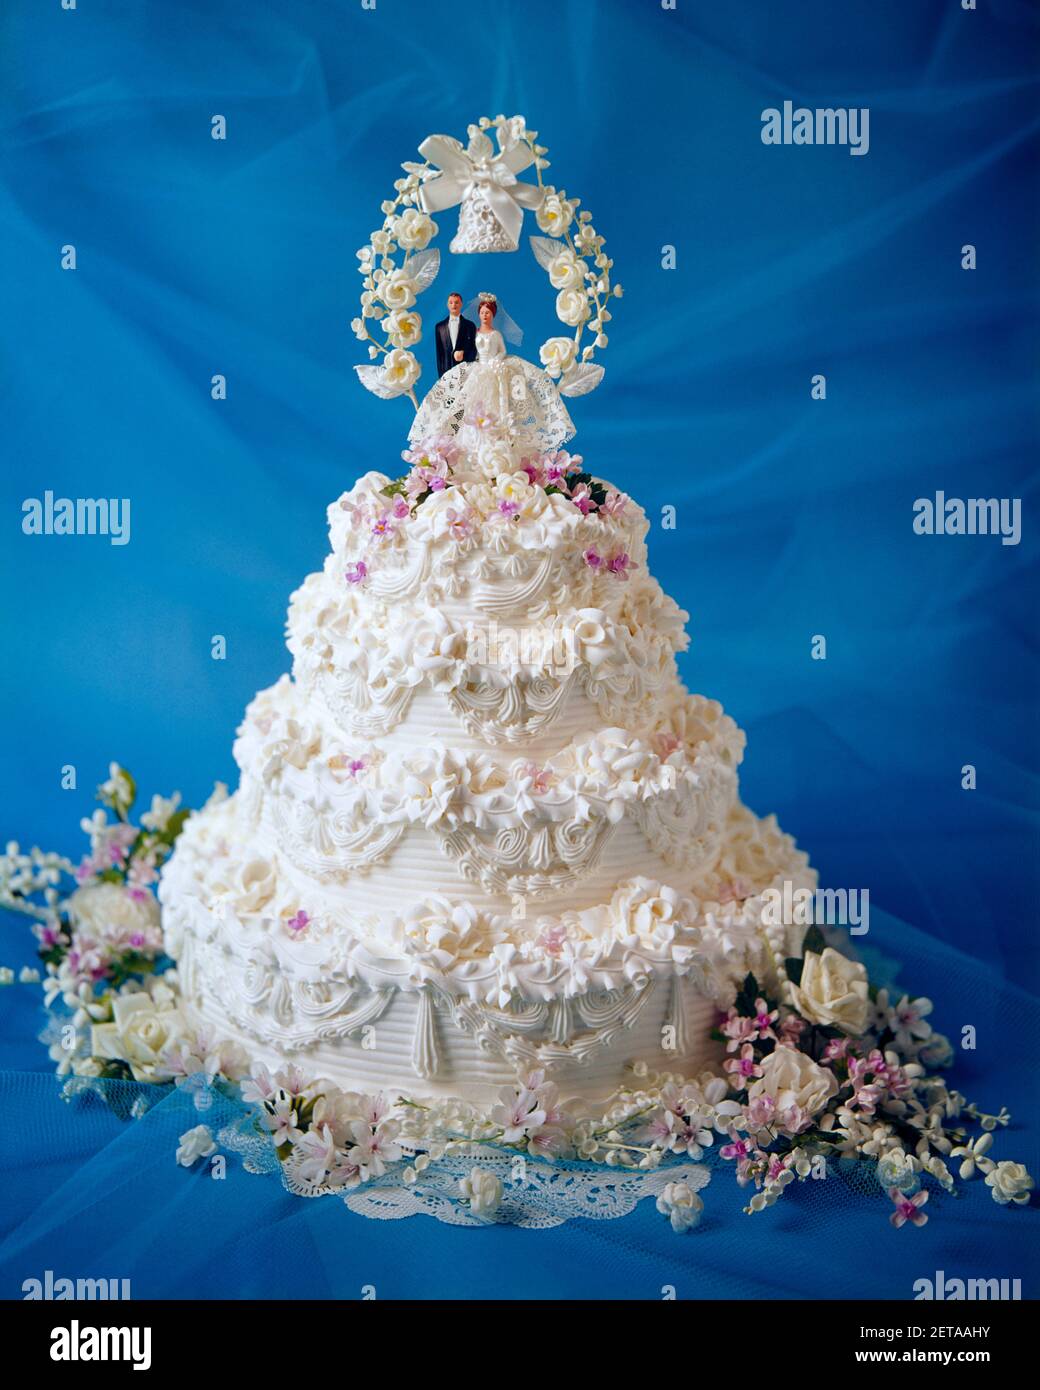 1960s Wedding Cake High Resolution Stock Photography And Images Alamy